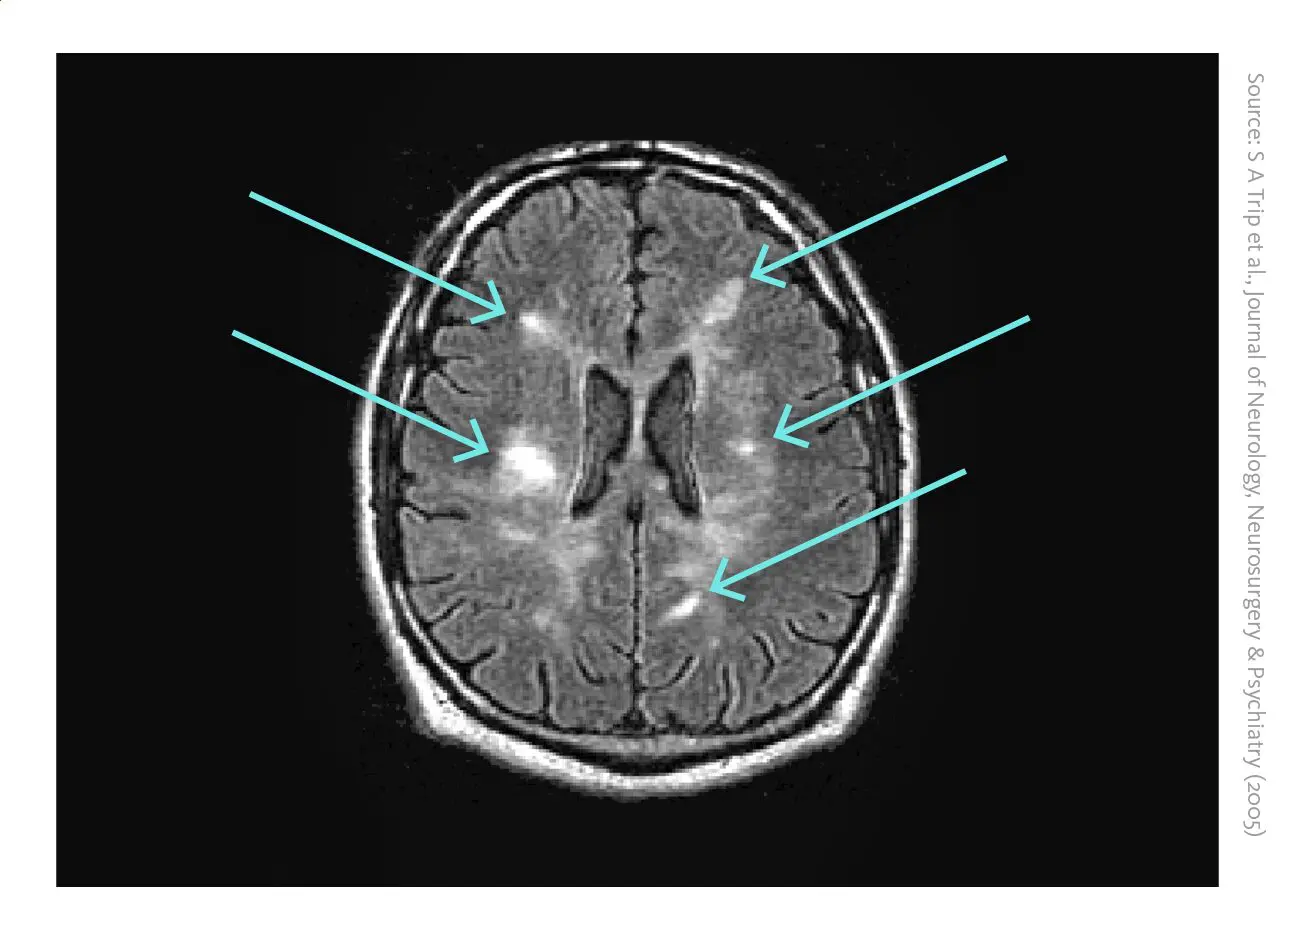 MRI of a brain affected by multiple sclerosis: The brain MRI of a 30-year-old man with relapsing remitting multiple sclerosis shows multiple lesions (white signals pointed out with arrows).